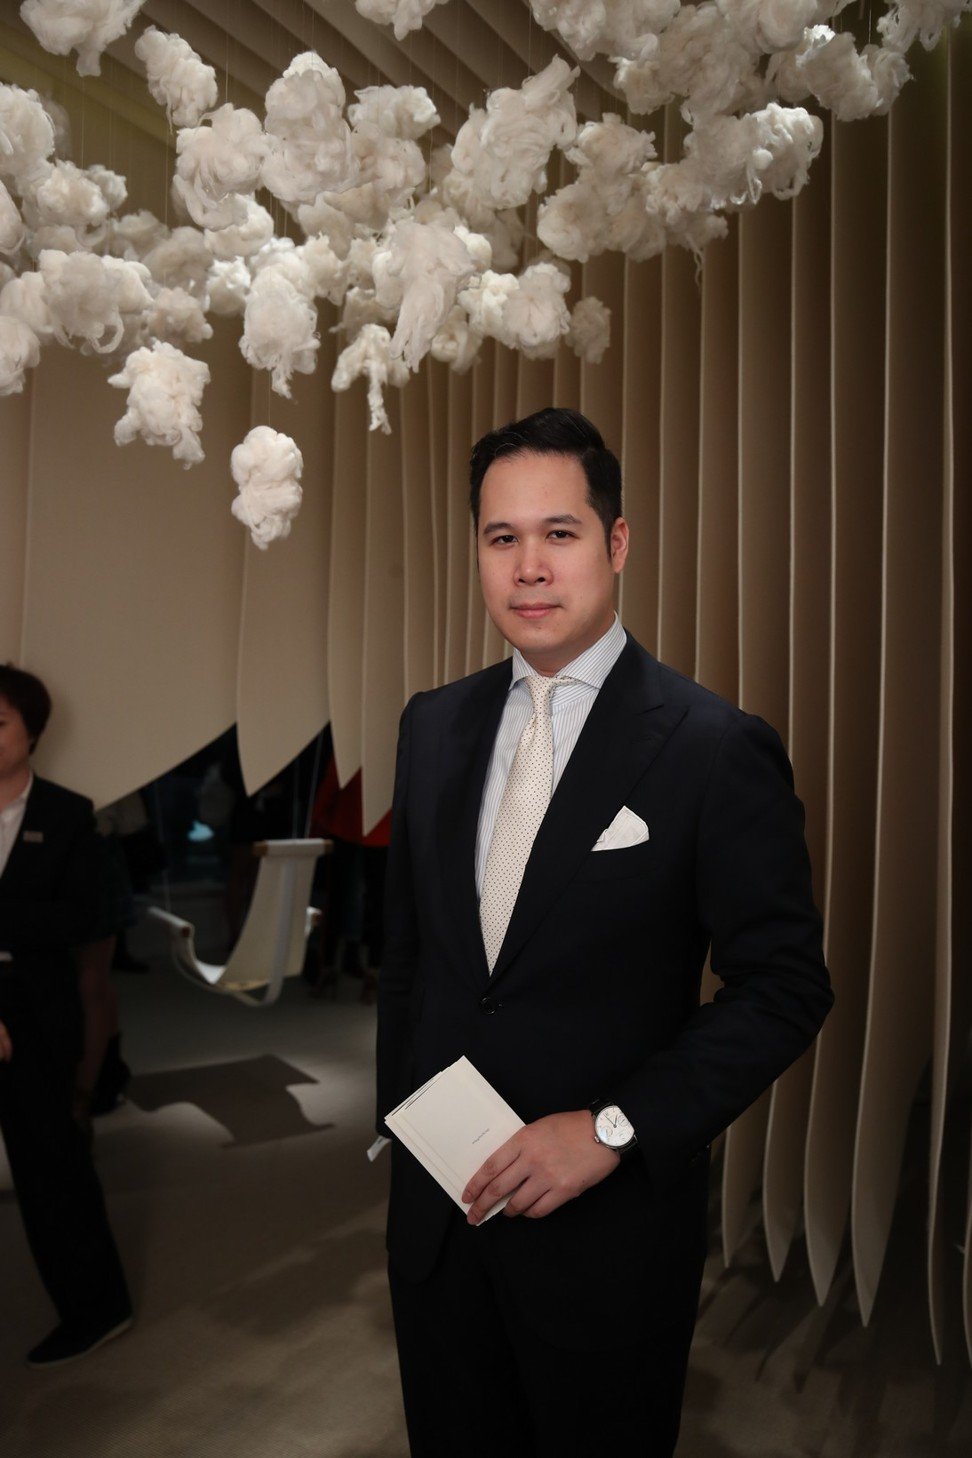 Loro Piana's star-studded cocktail opens 'The Gift of Kings' exhibition